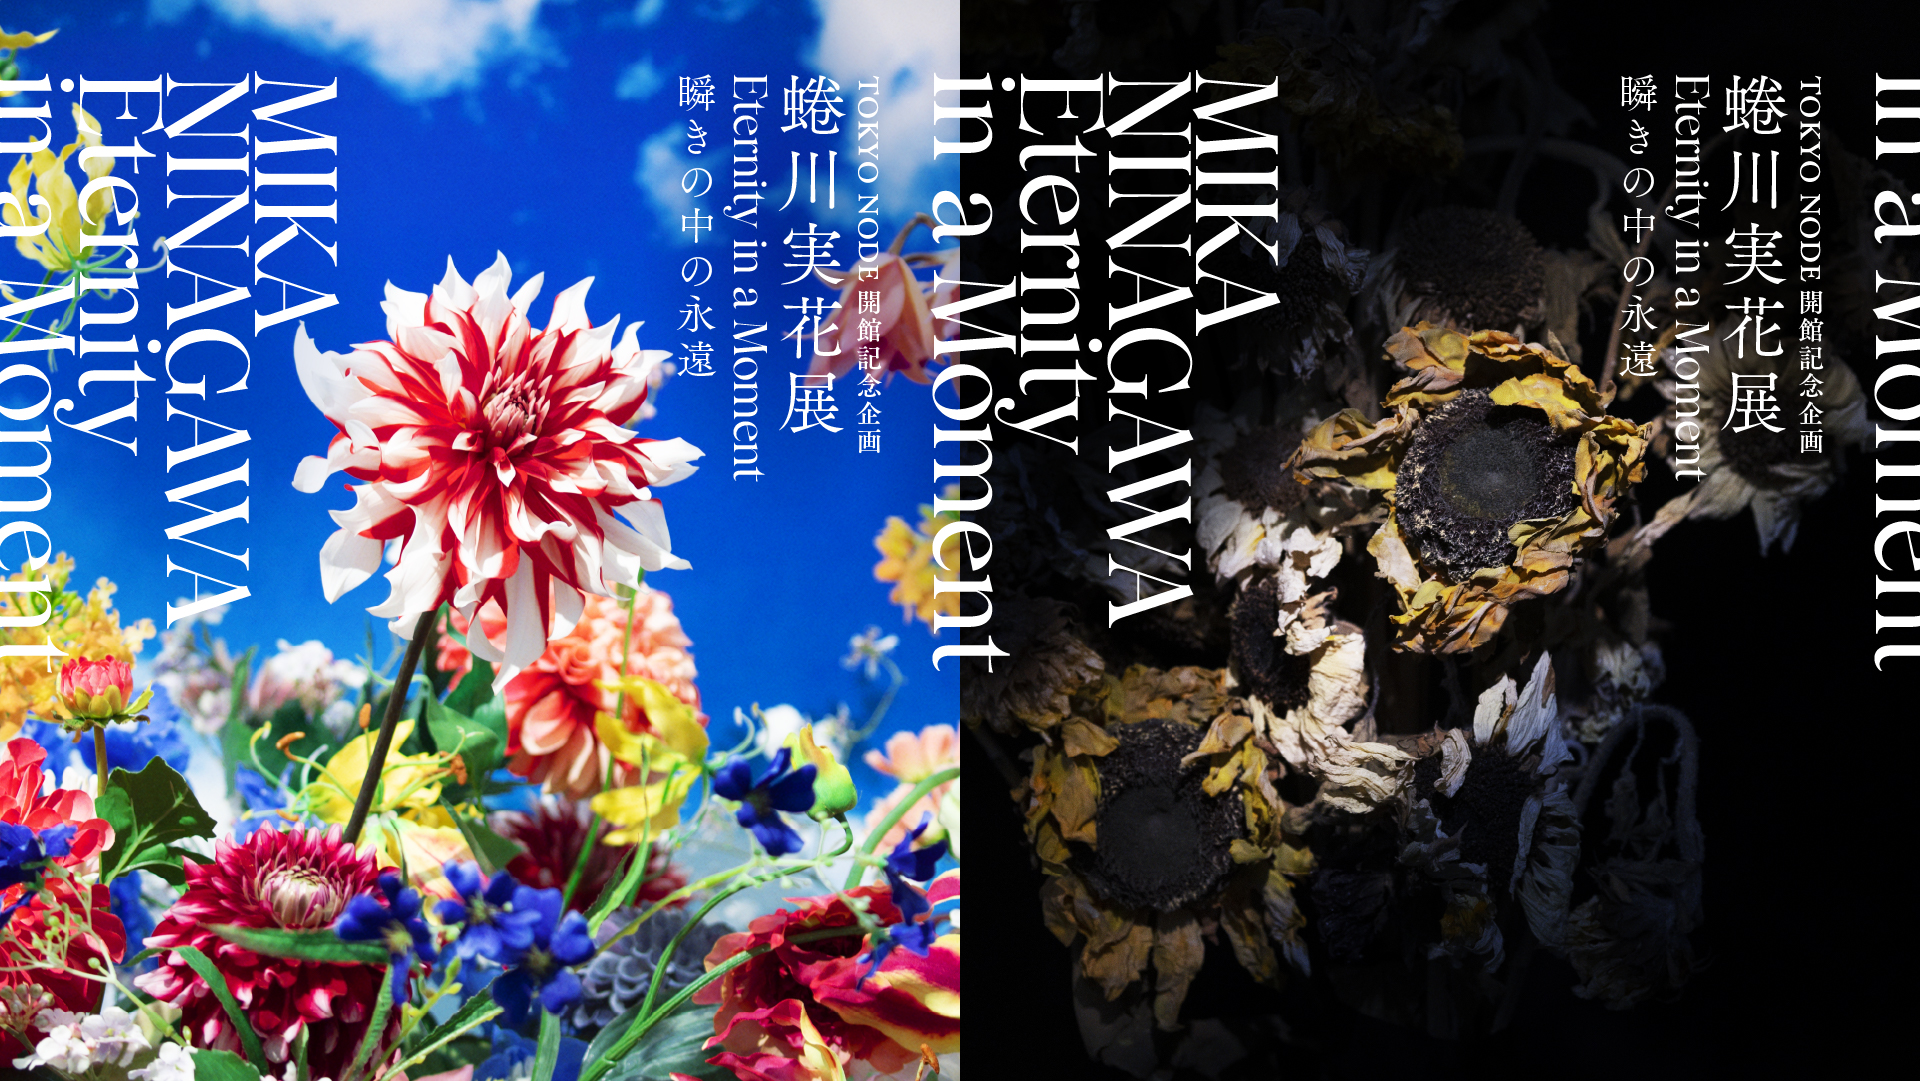 Dive into a World of Color at Mika Ninagawa’s “Eternity in a Moment” at Toranomon Hills